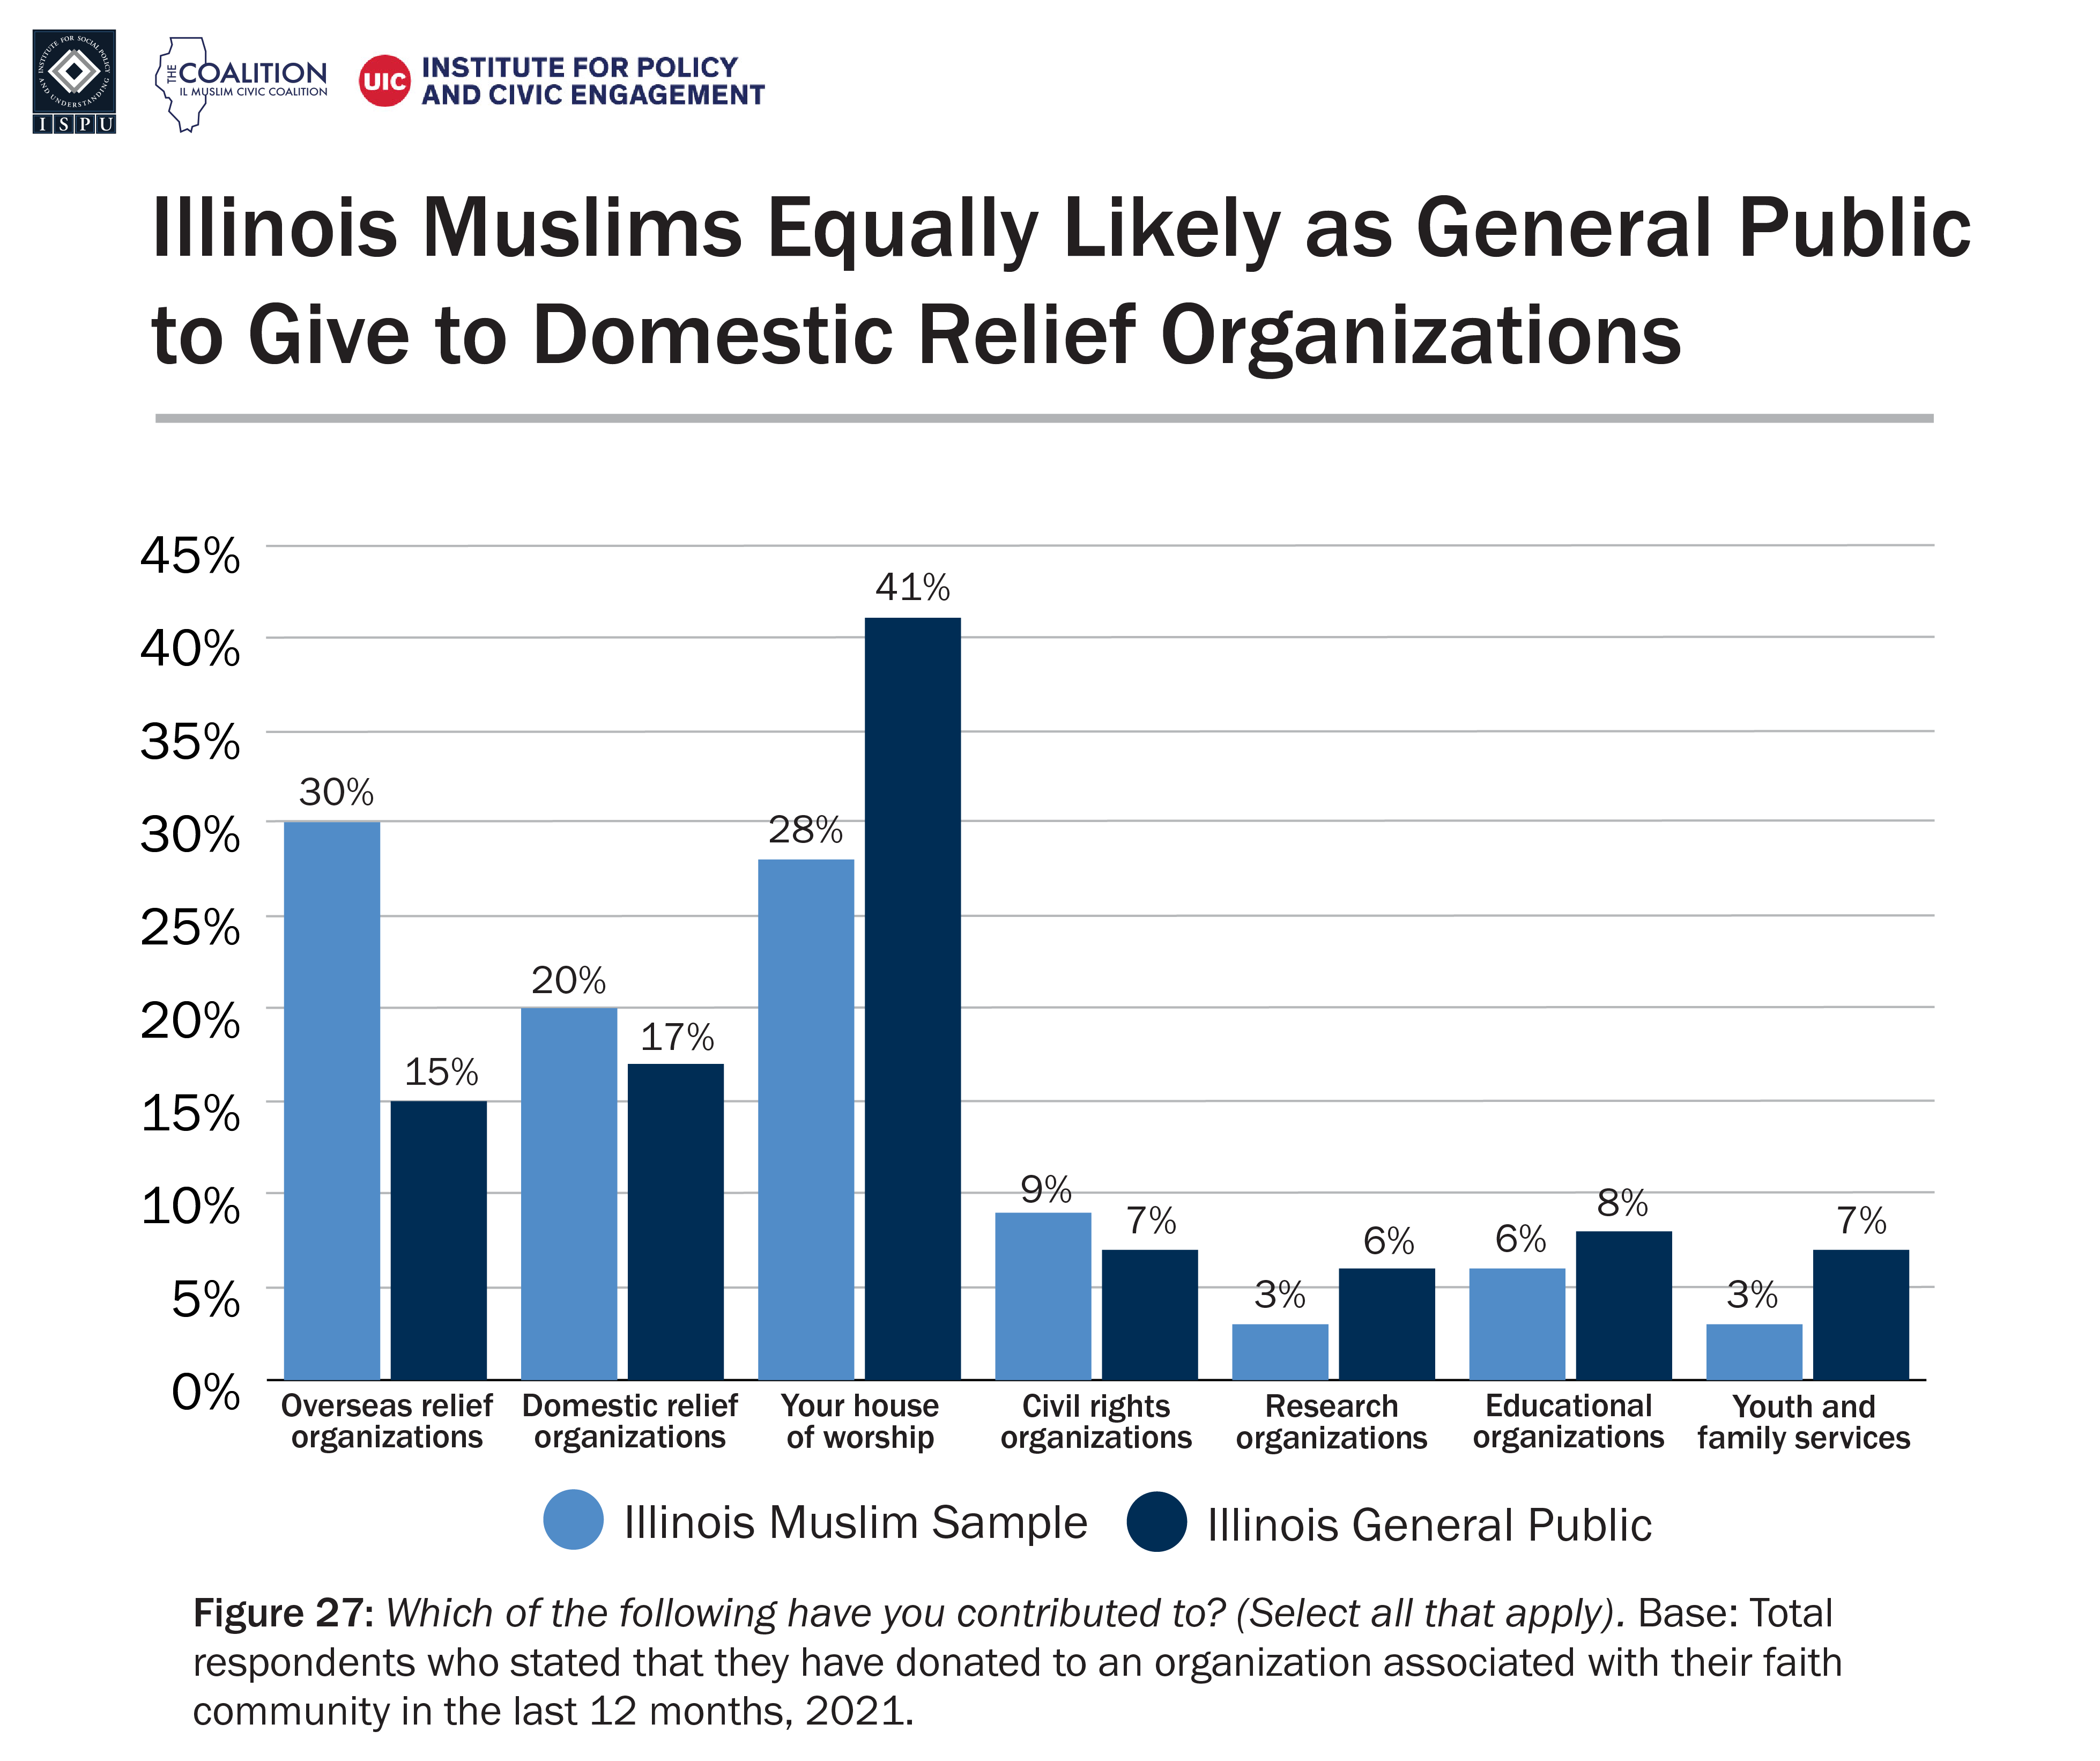 A bar graph showing recipients of community giving among the Illinois Muslim sample and Illinois general public